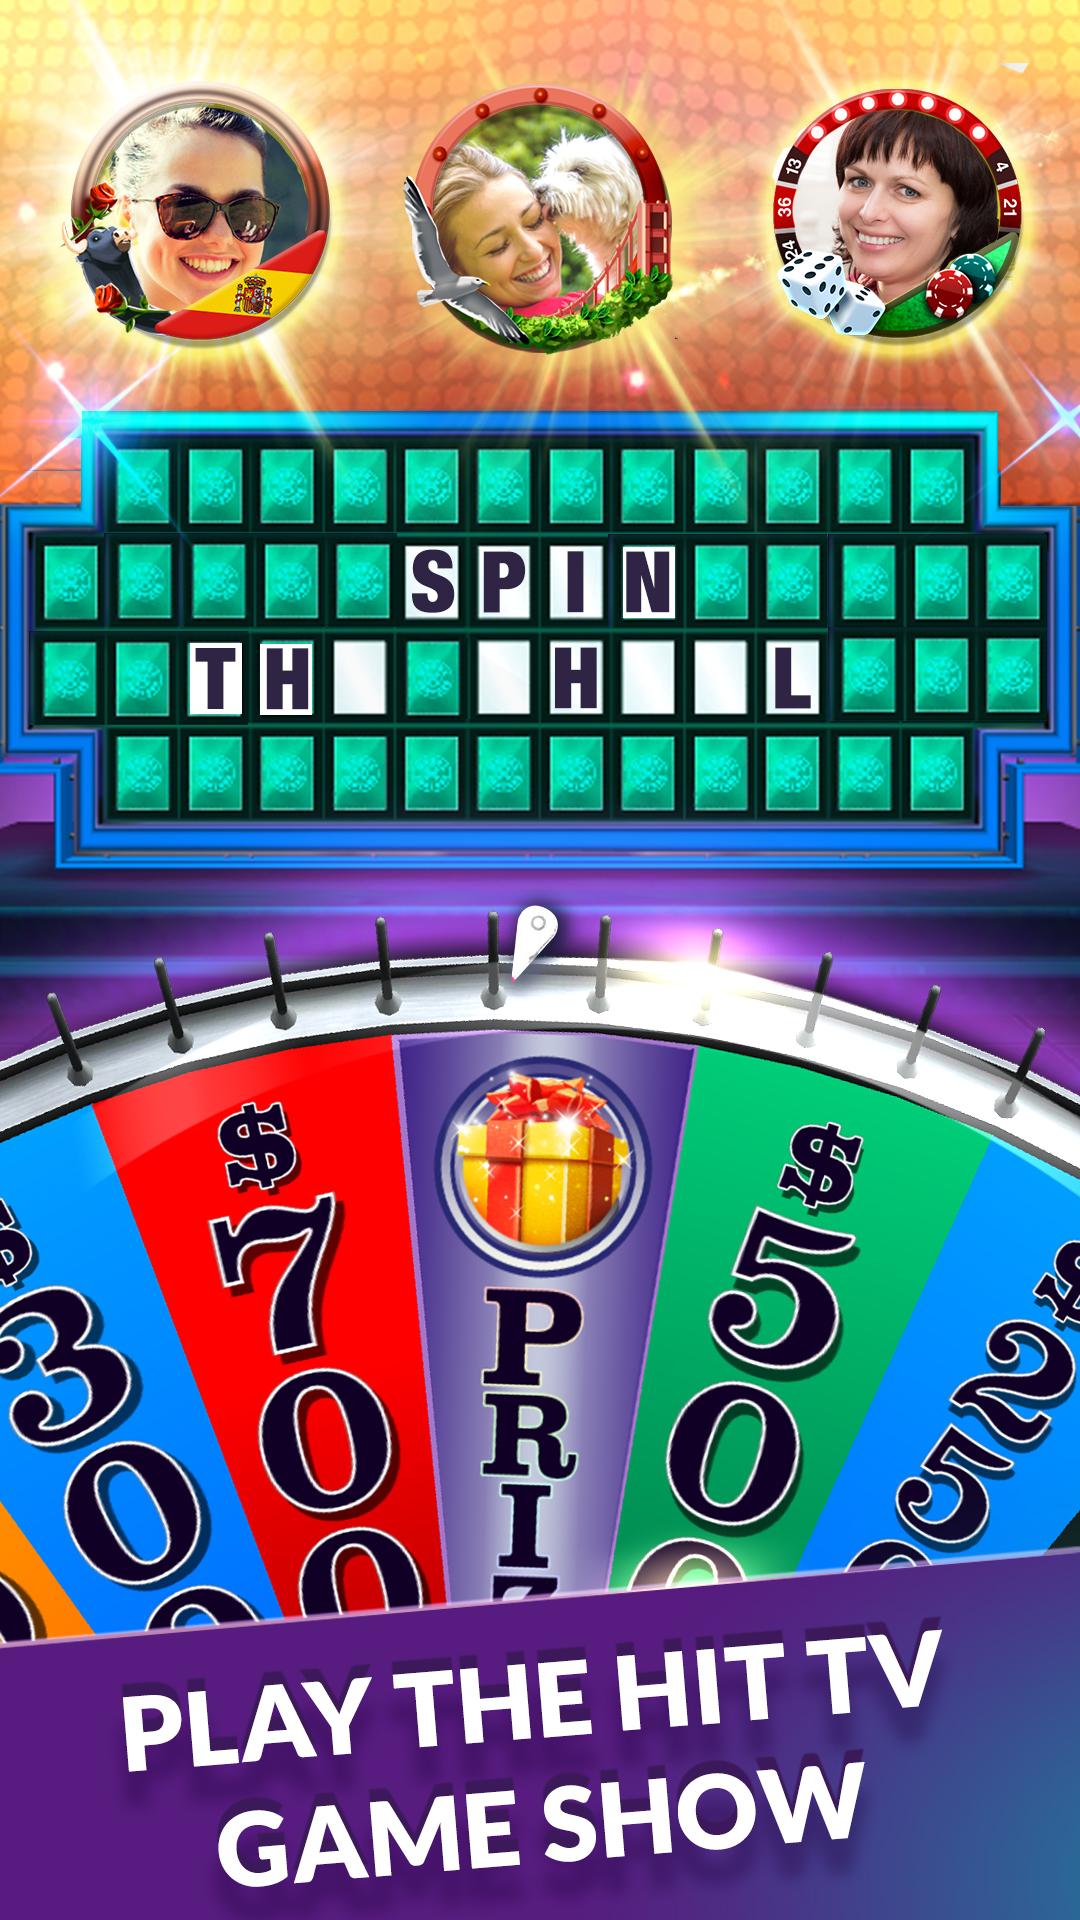 Wheel of fortune official rules